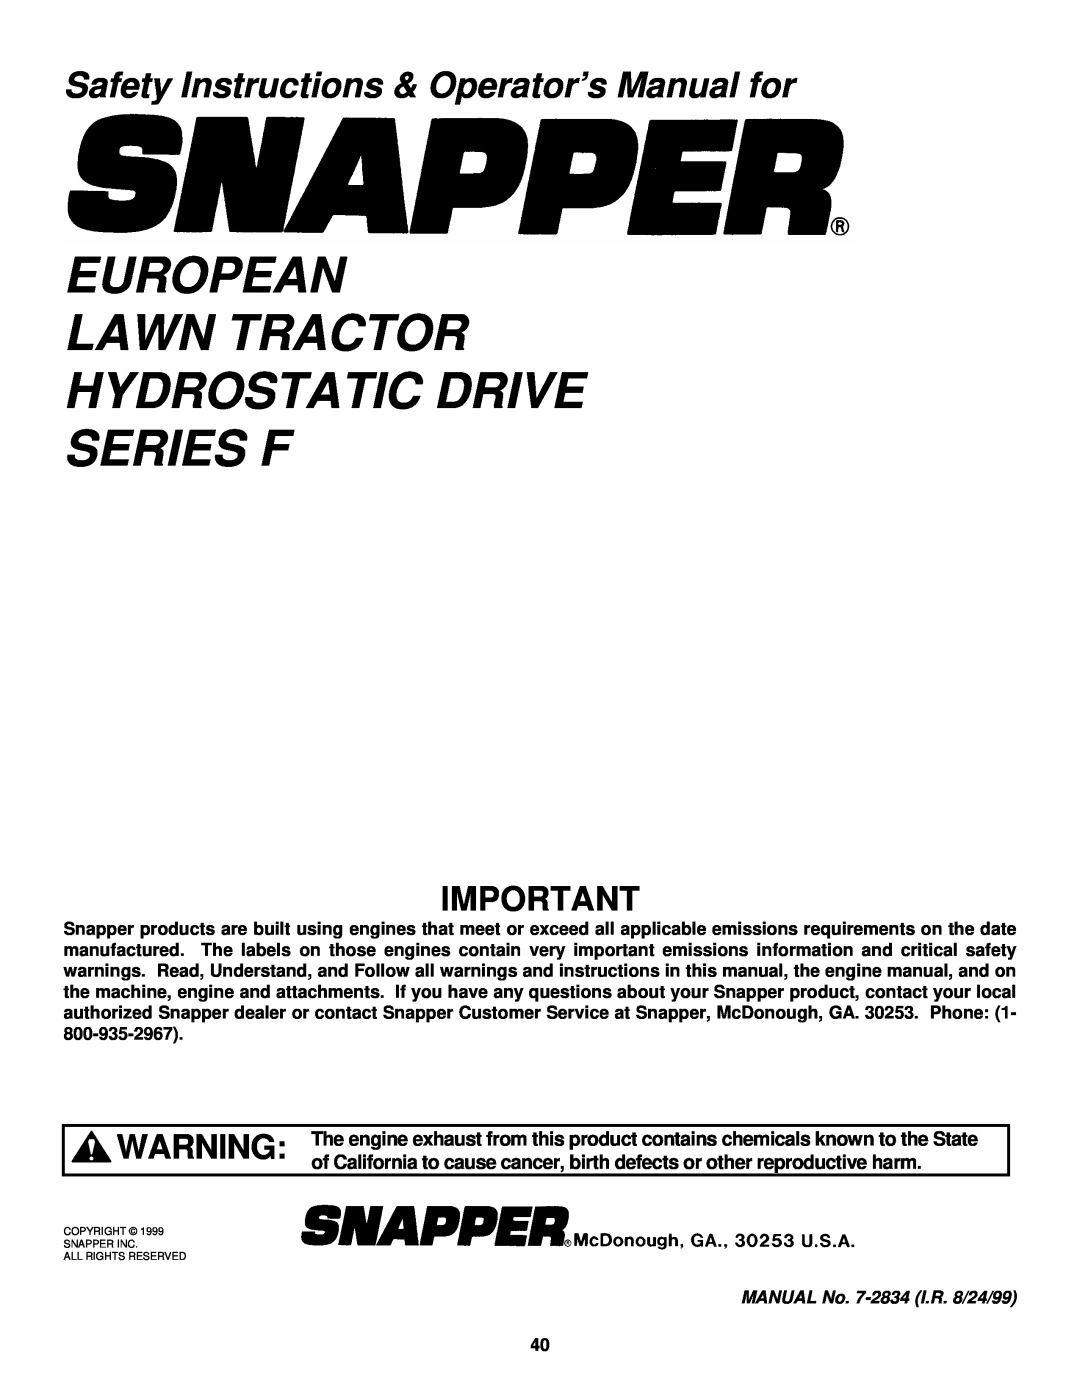 Snapper ELT145H33FBV European Lawn Tractor Hydrostatic Drive Series F, Safety Instructions & Operator’s Manual for 